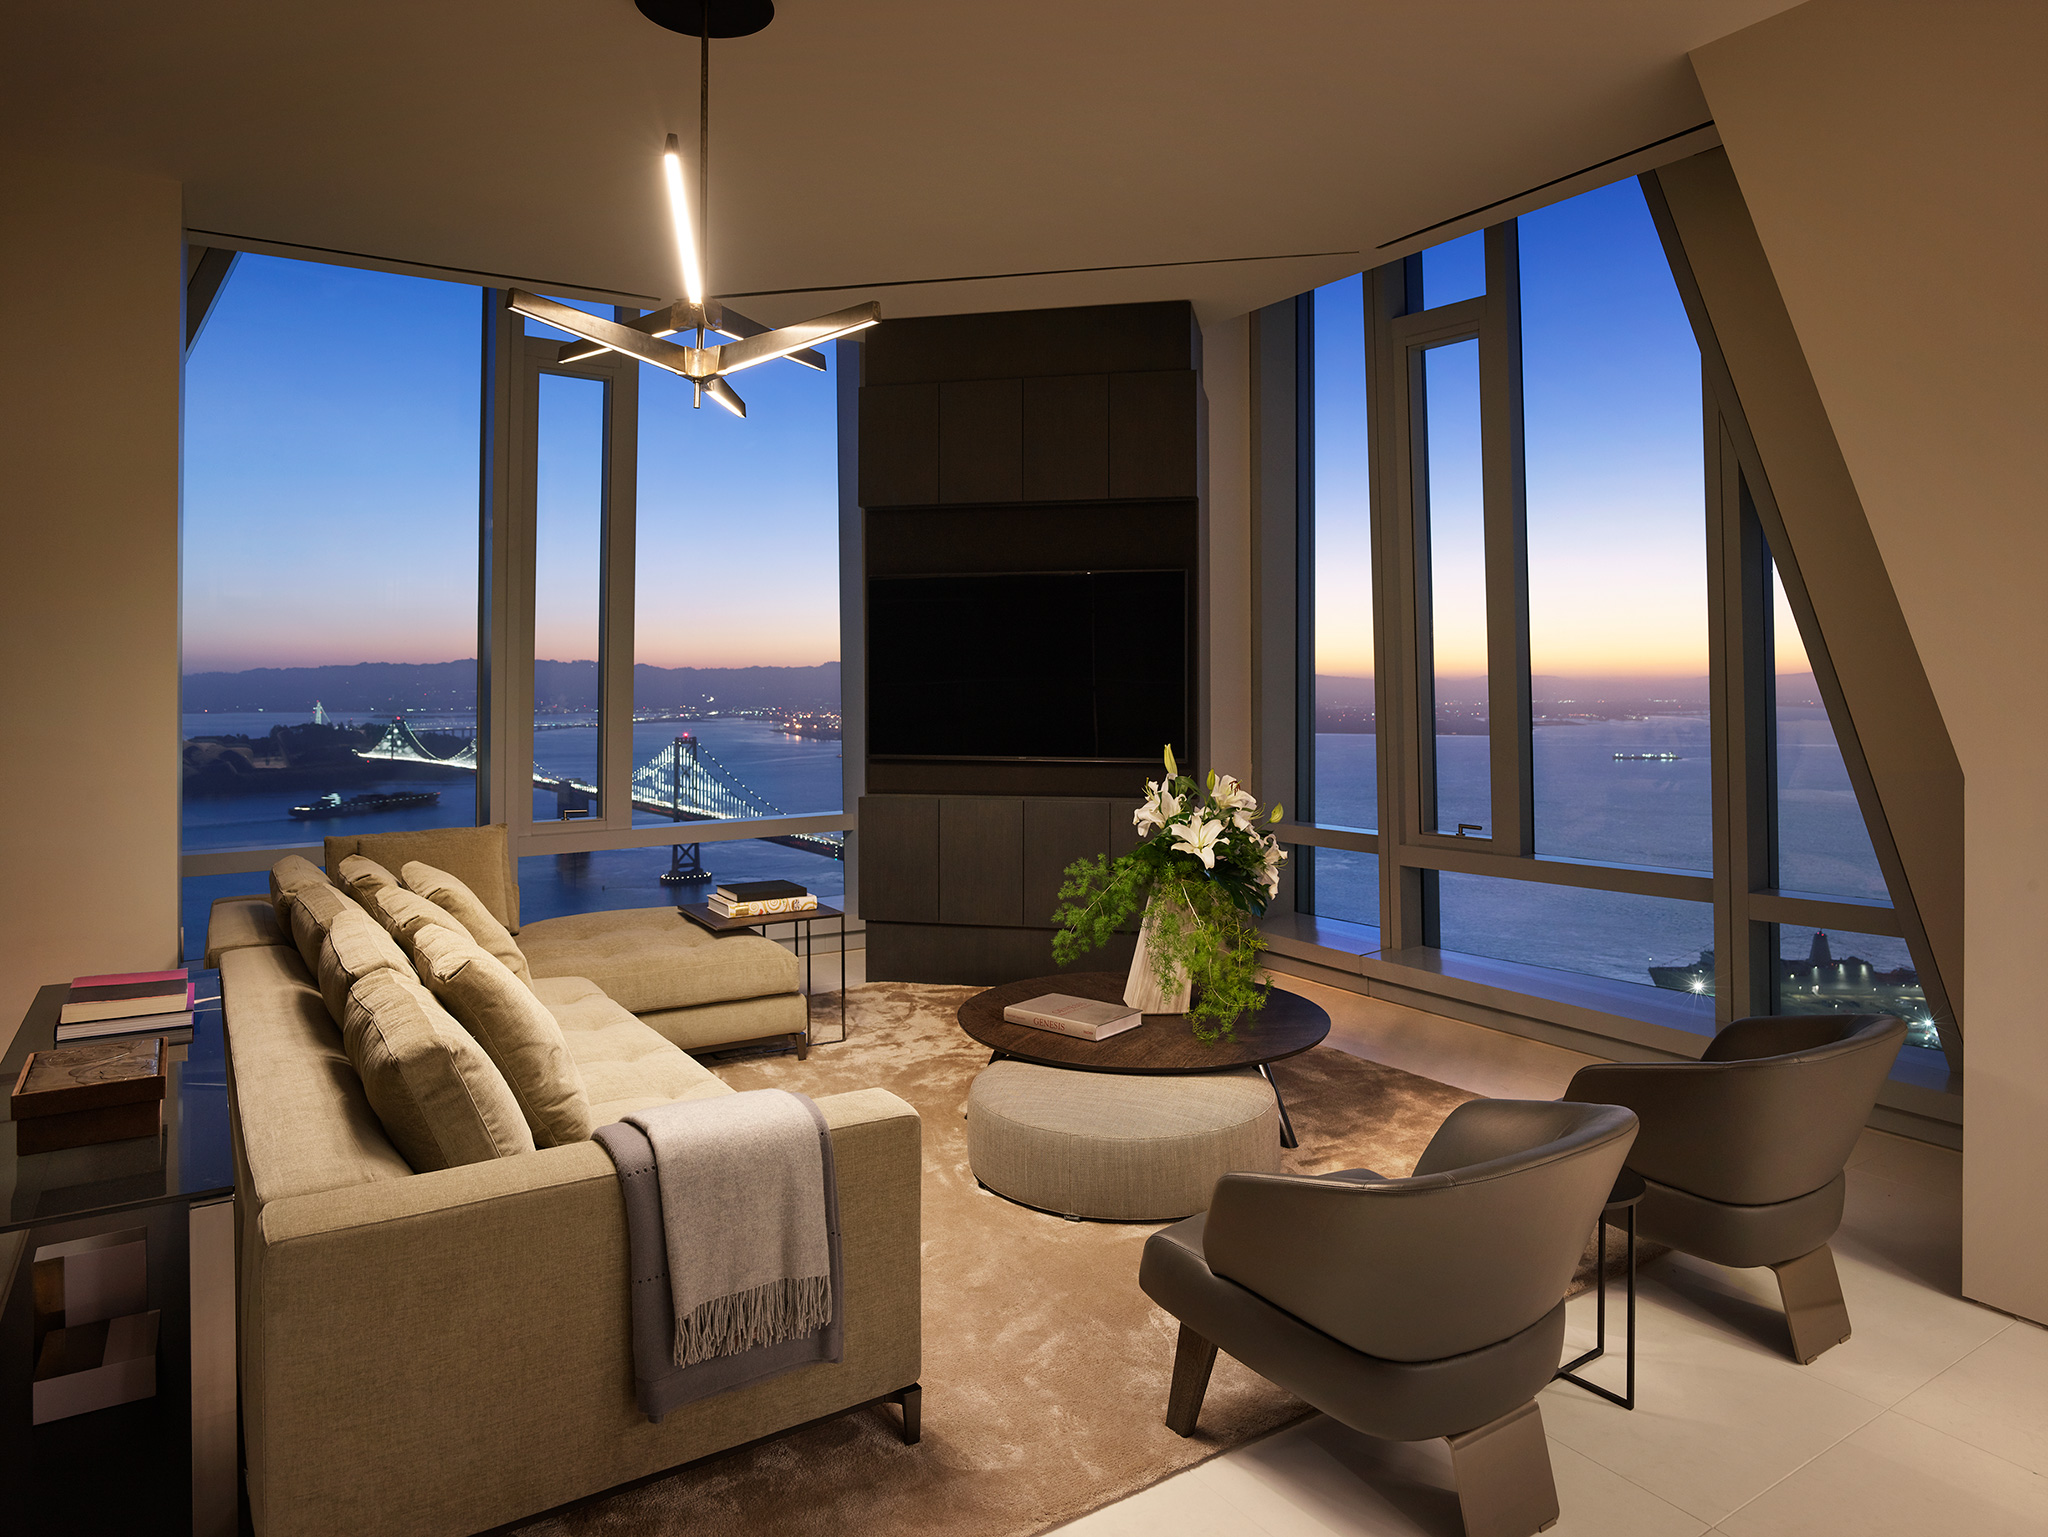 Grand Penthouse Family Room at dusk